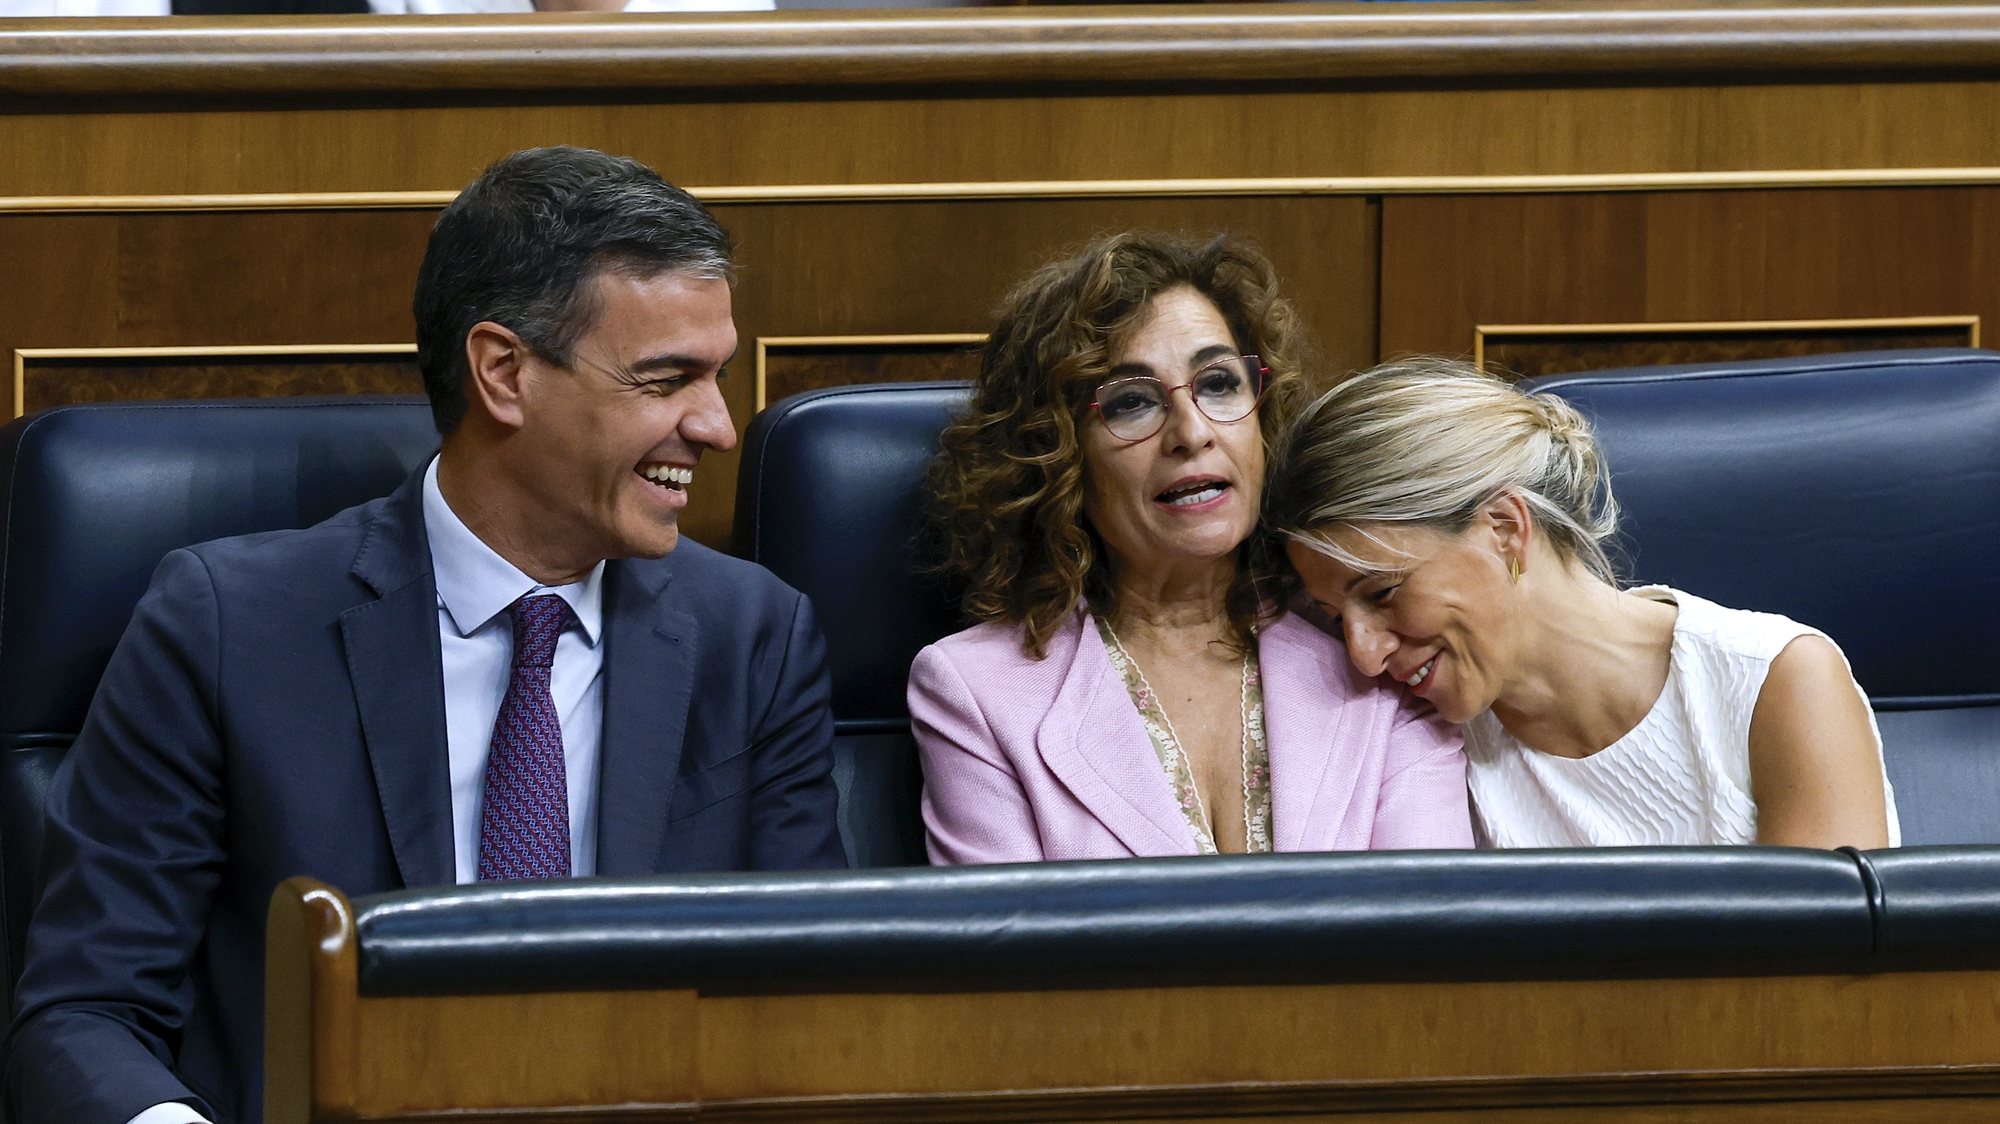 epa11378959 (L-R) Spanish Prime Minister Pedro Sanchez, First Deputy Prime Minister and Minister for Treasury Maria Jesus Montero, and Second Deputy Prime Minister and Minister of Labor Yolanda Diaz attend the debate on the so-called Amnesty Law that is expected to be approved at the Lower House in Madrid, Spain, 30 May 2024. The Amnesty Law is part of the deal struck by the Spanish Prime Minister&#039;s PSOE party to form a coalition Government with the support of Catalan and Basque pro-independent parties following the elections in July 2023. The bill would grant amnesty to people facing legal issues for involvement in Catalonia&#039;s failed 2017 independence bid.  EPA/JJ Guillen